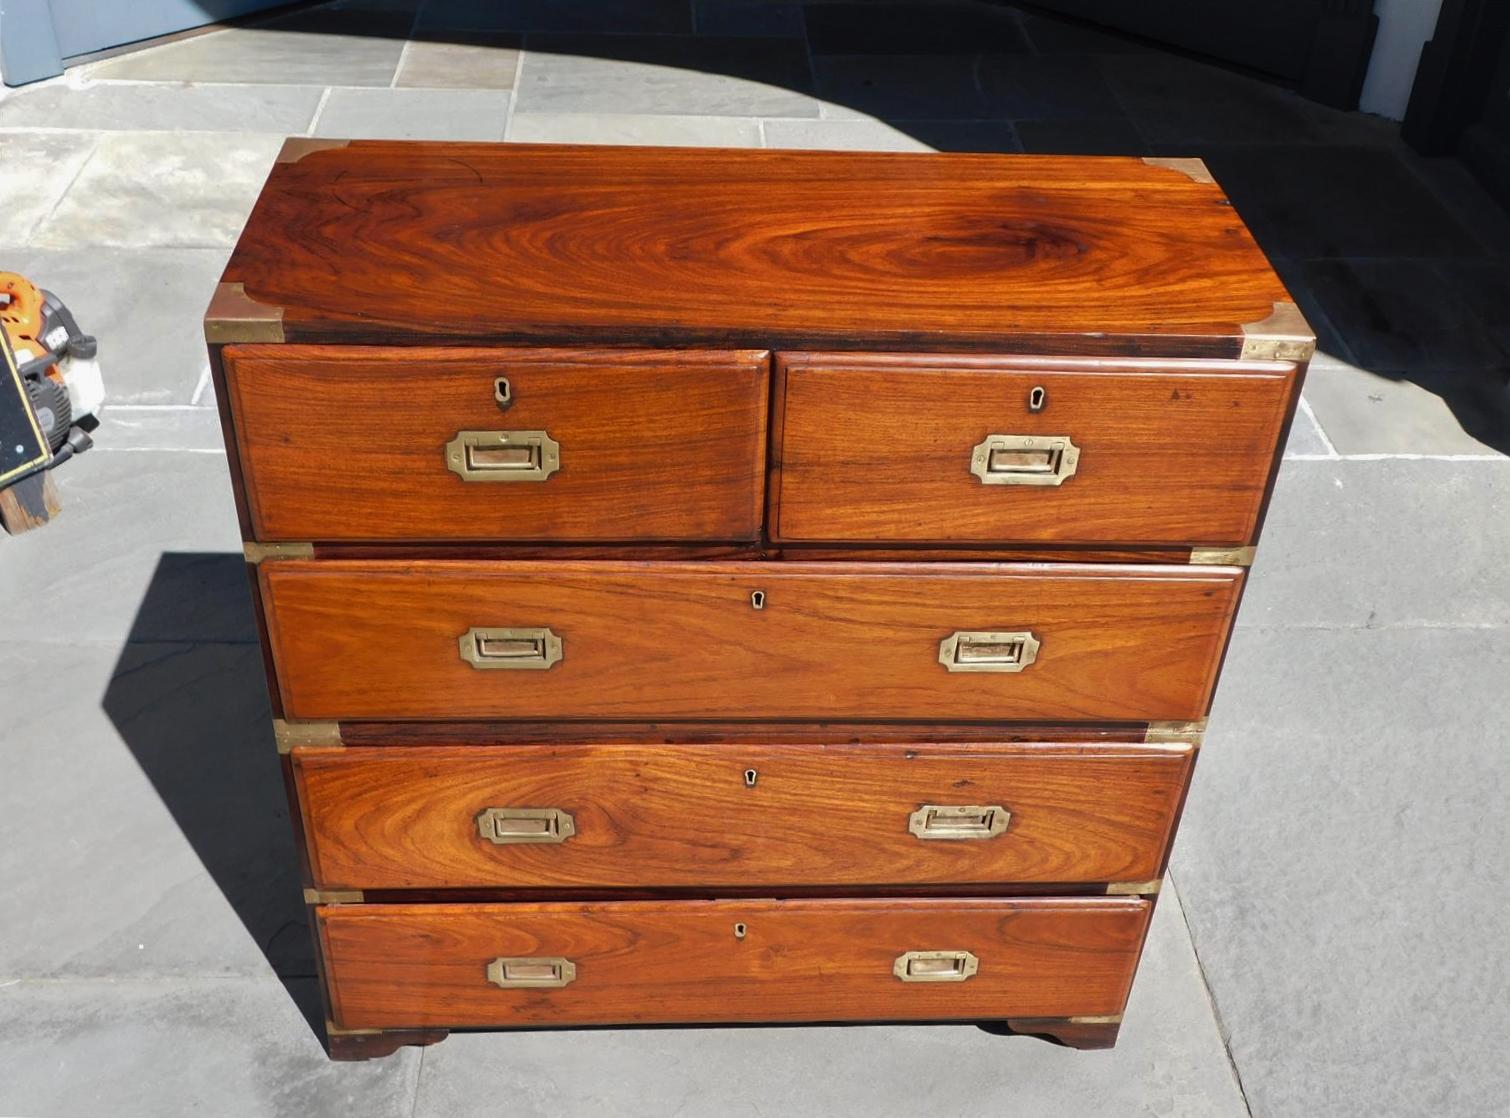 English camphor wood five-drawer military campaign chest with the original recessed brasses, key hole escutcheons, brass corner mounts, and terminating on the original bracket feet, Early 19th century. Campaign chest separated in two pieces to carry